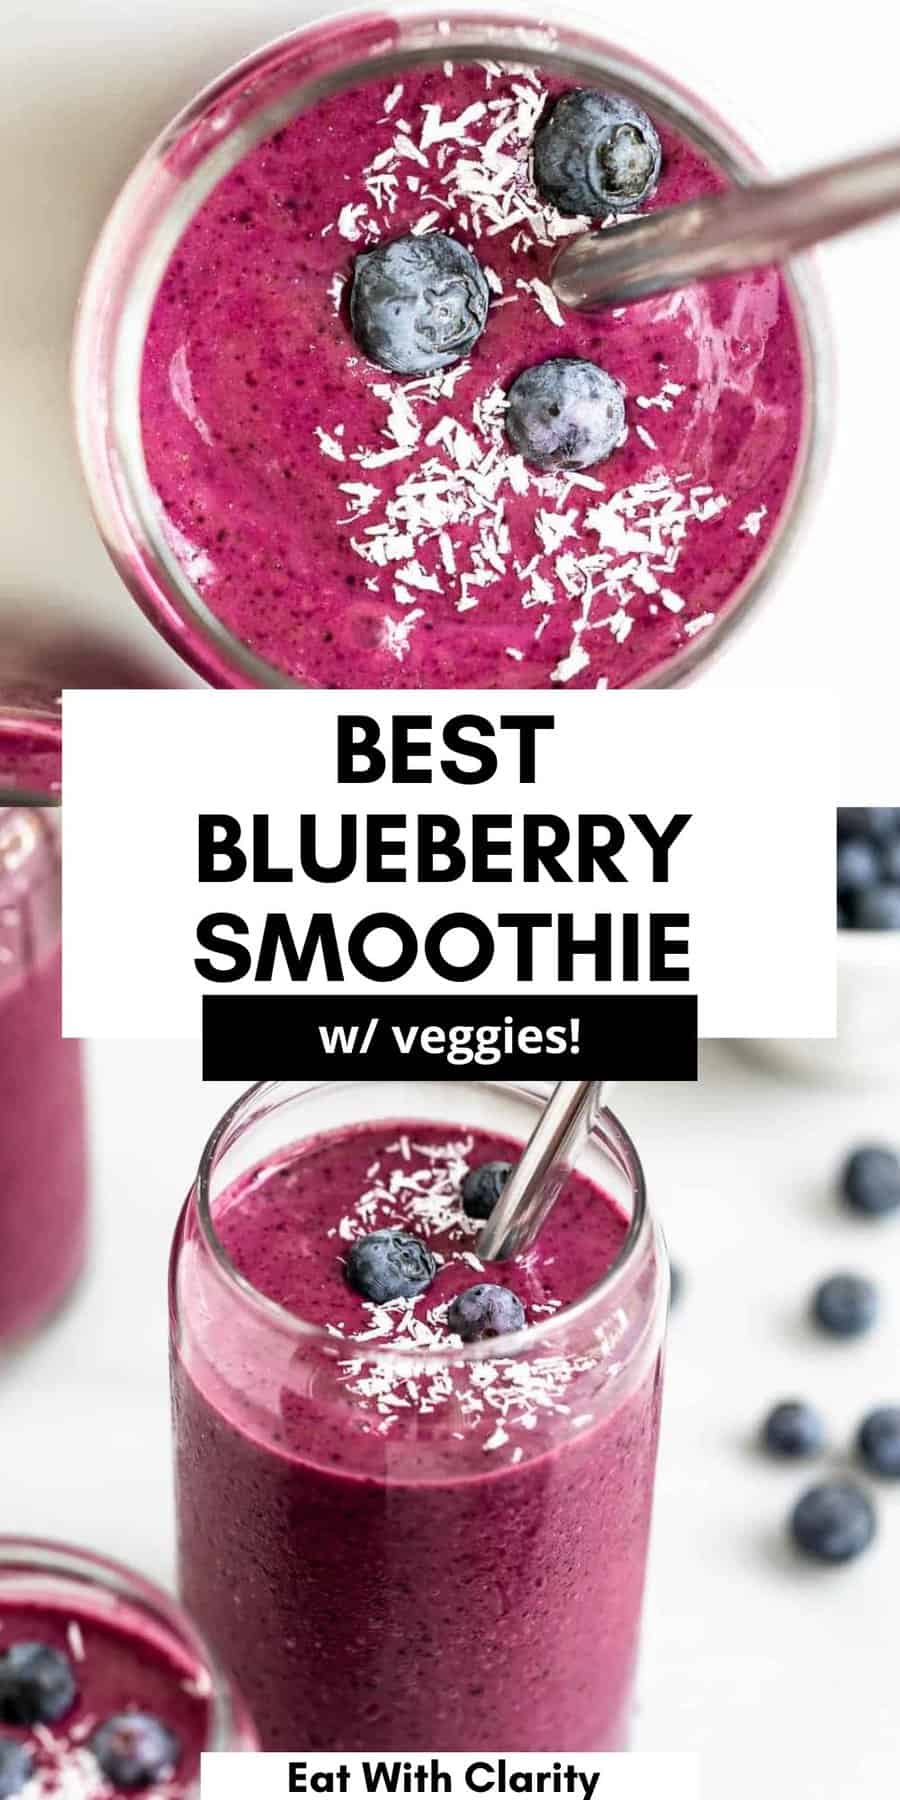 Blueberry Cauliflower Smoothie - Eat With Clarity